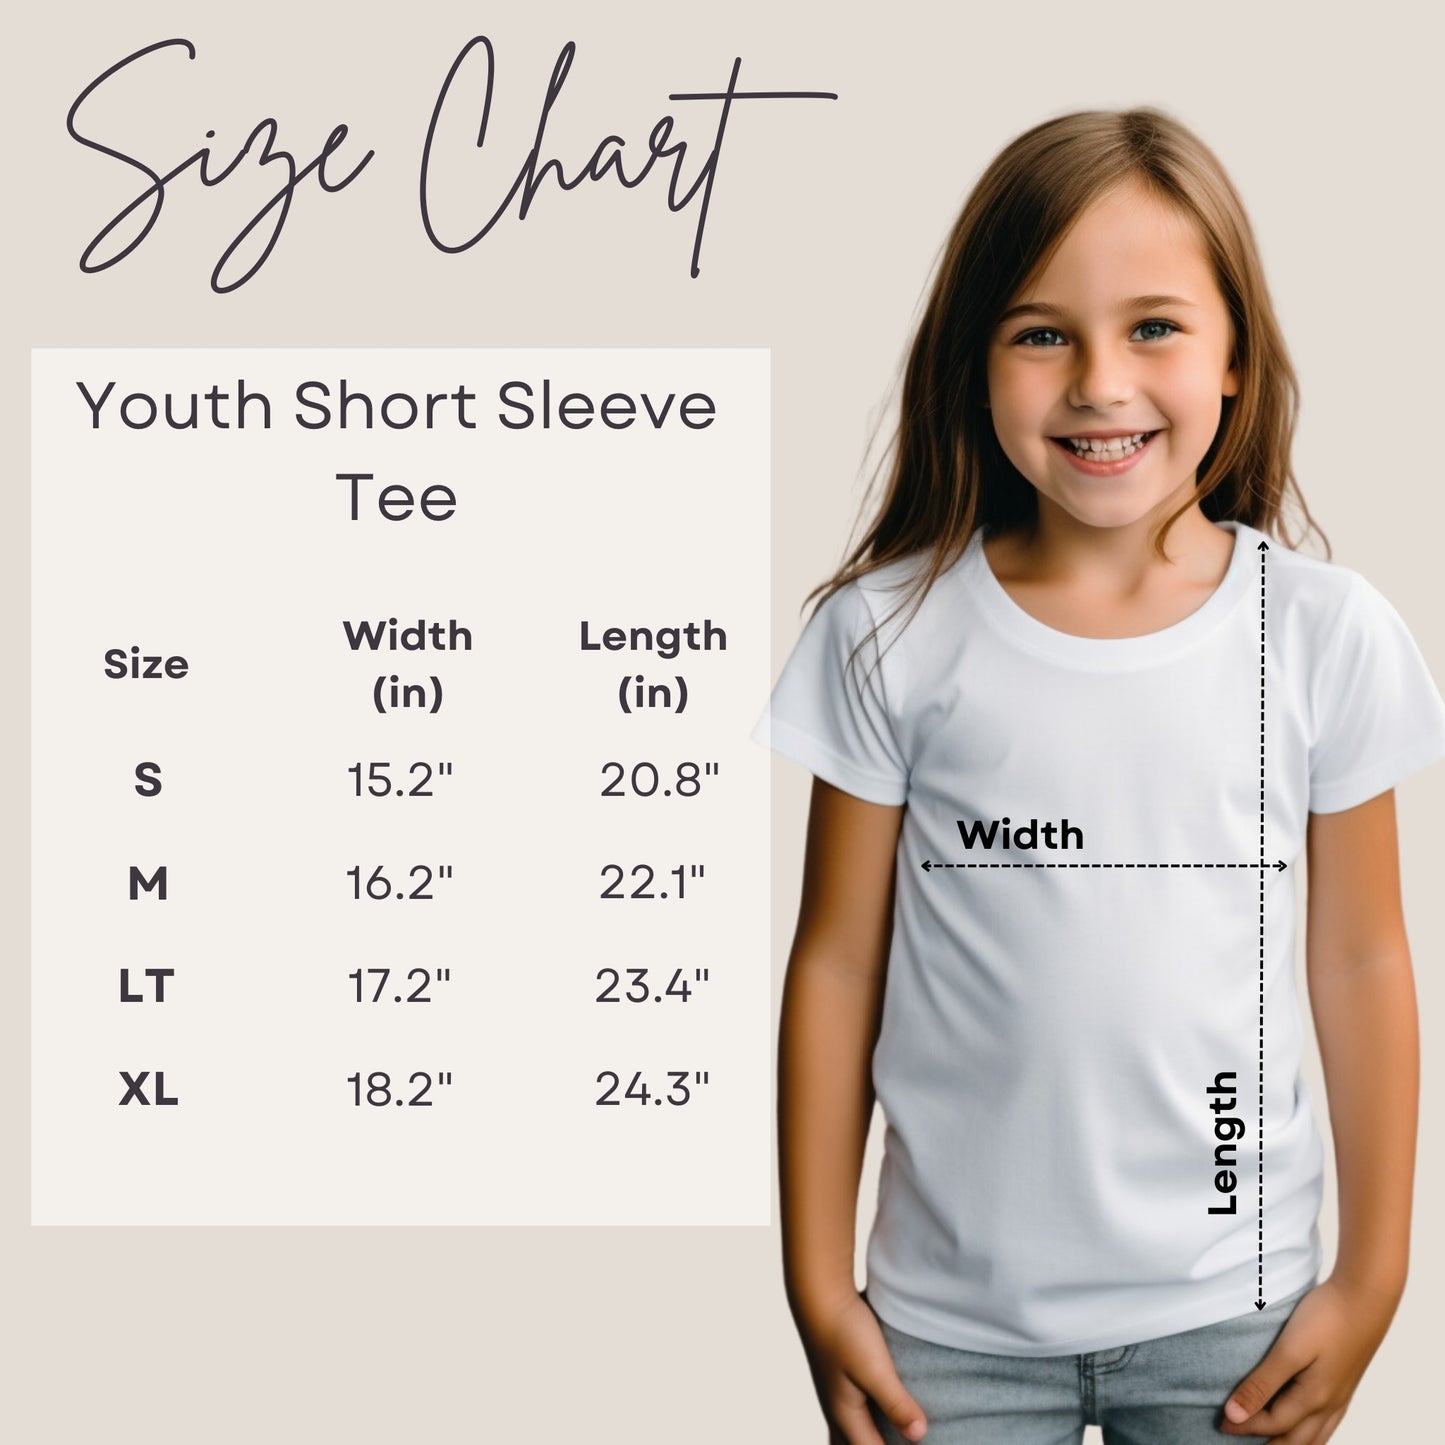 Youth size chart with measurements.